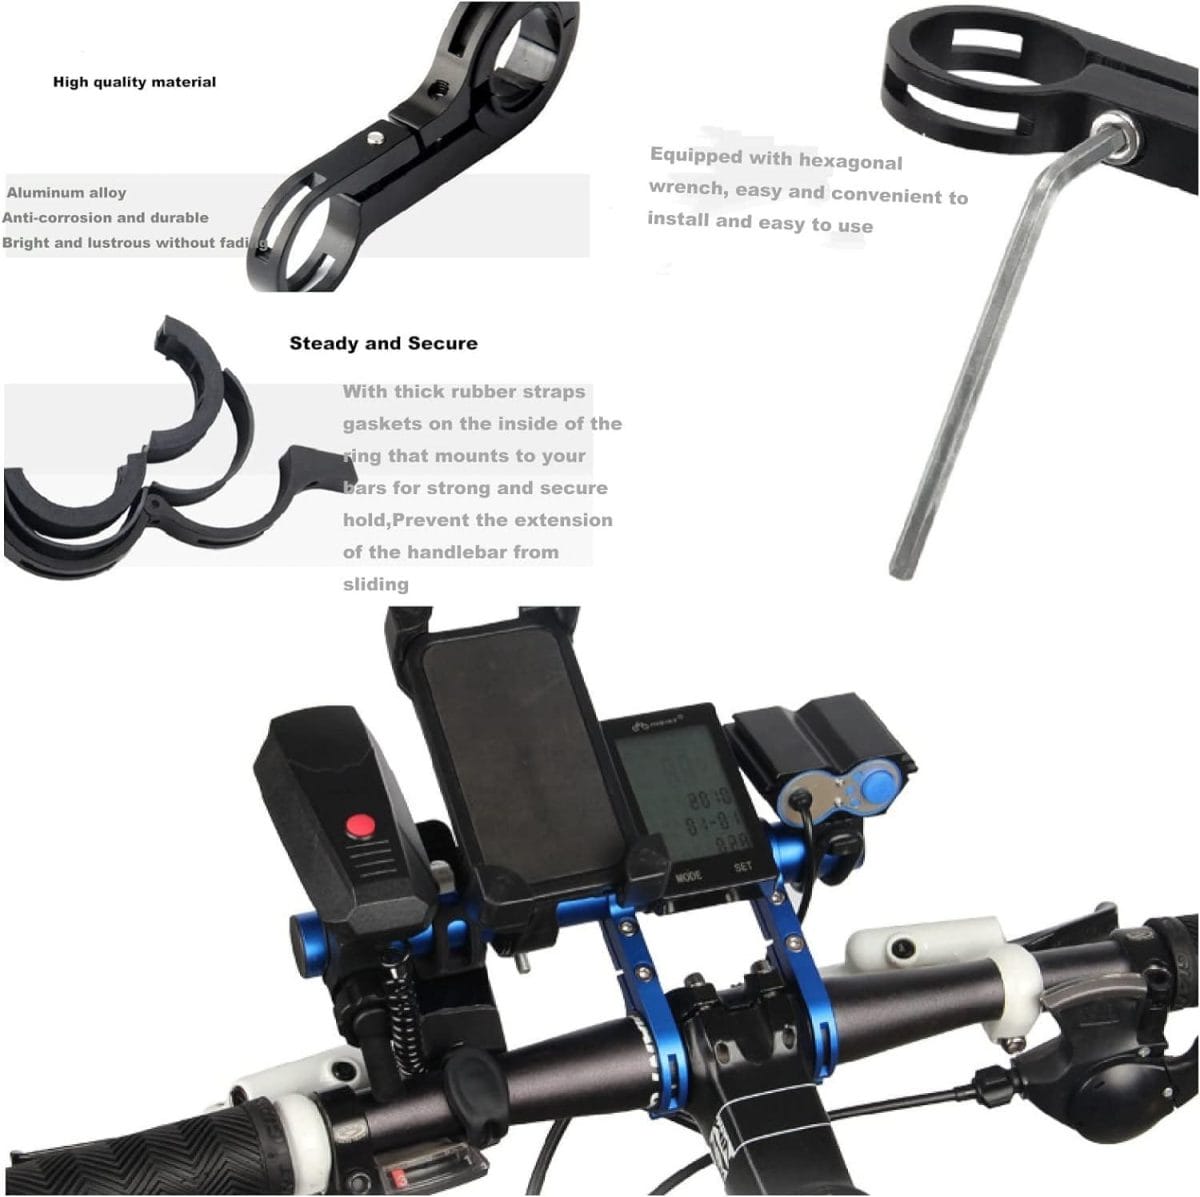 Bike Handlebar Extender,Bike Handlebar Extender with Double Mounting Clamp Bracket,For Bike Mounts,Extender Bars, Headlights,Light Lamp,Bicycle Accessories